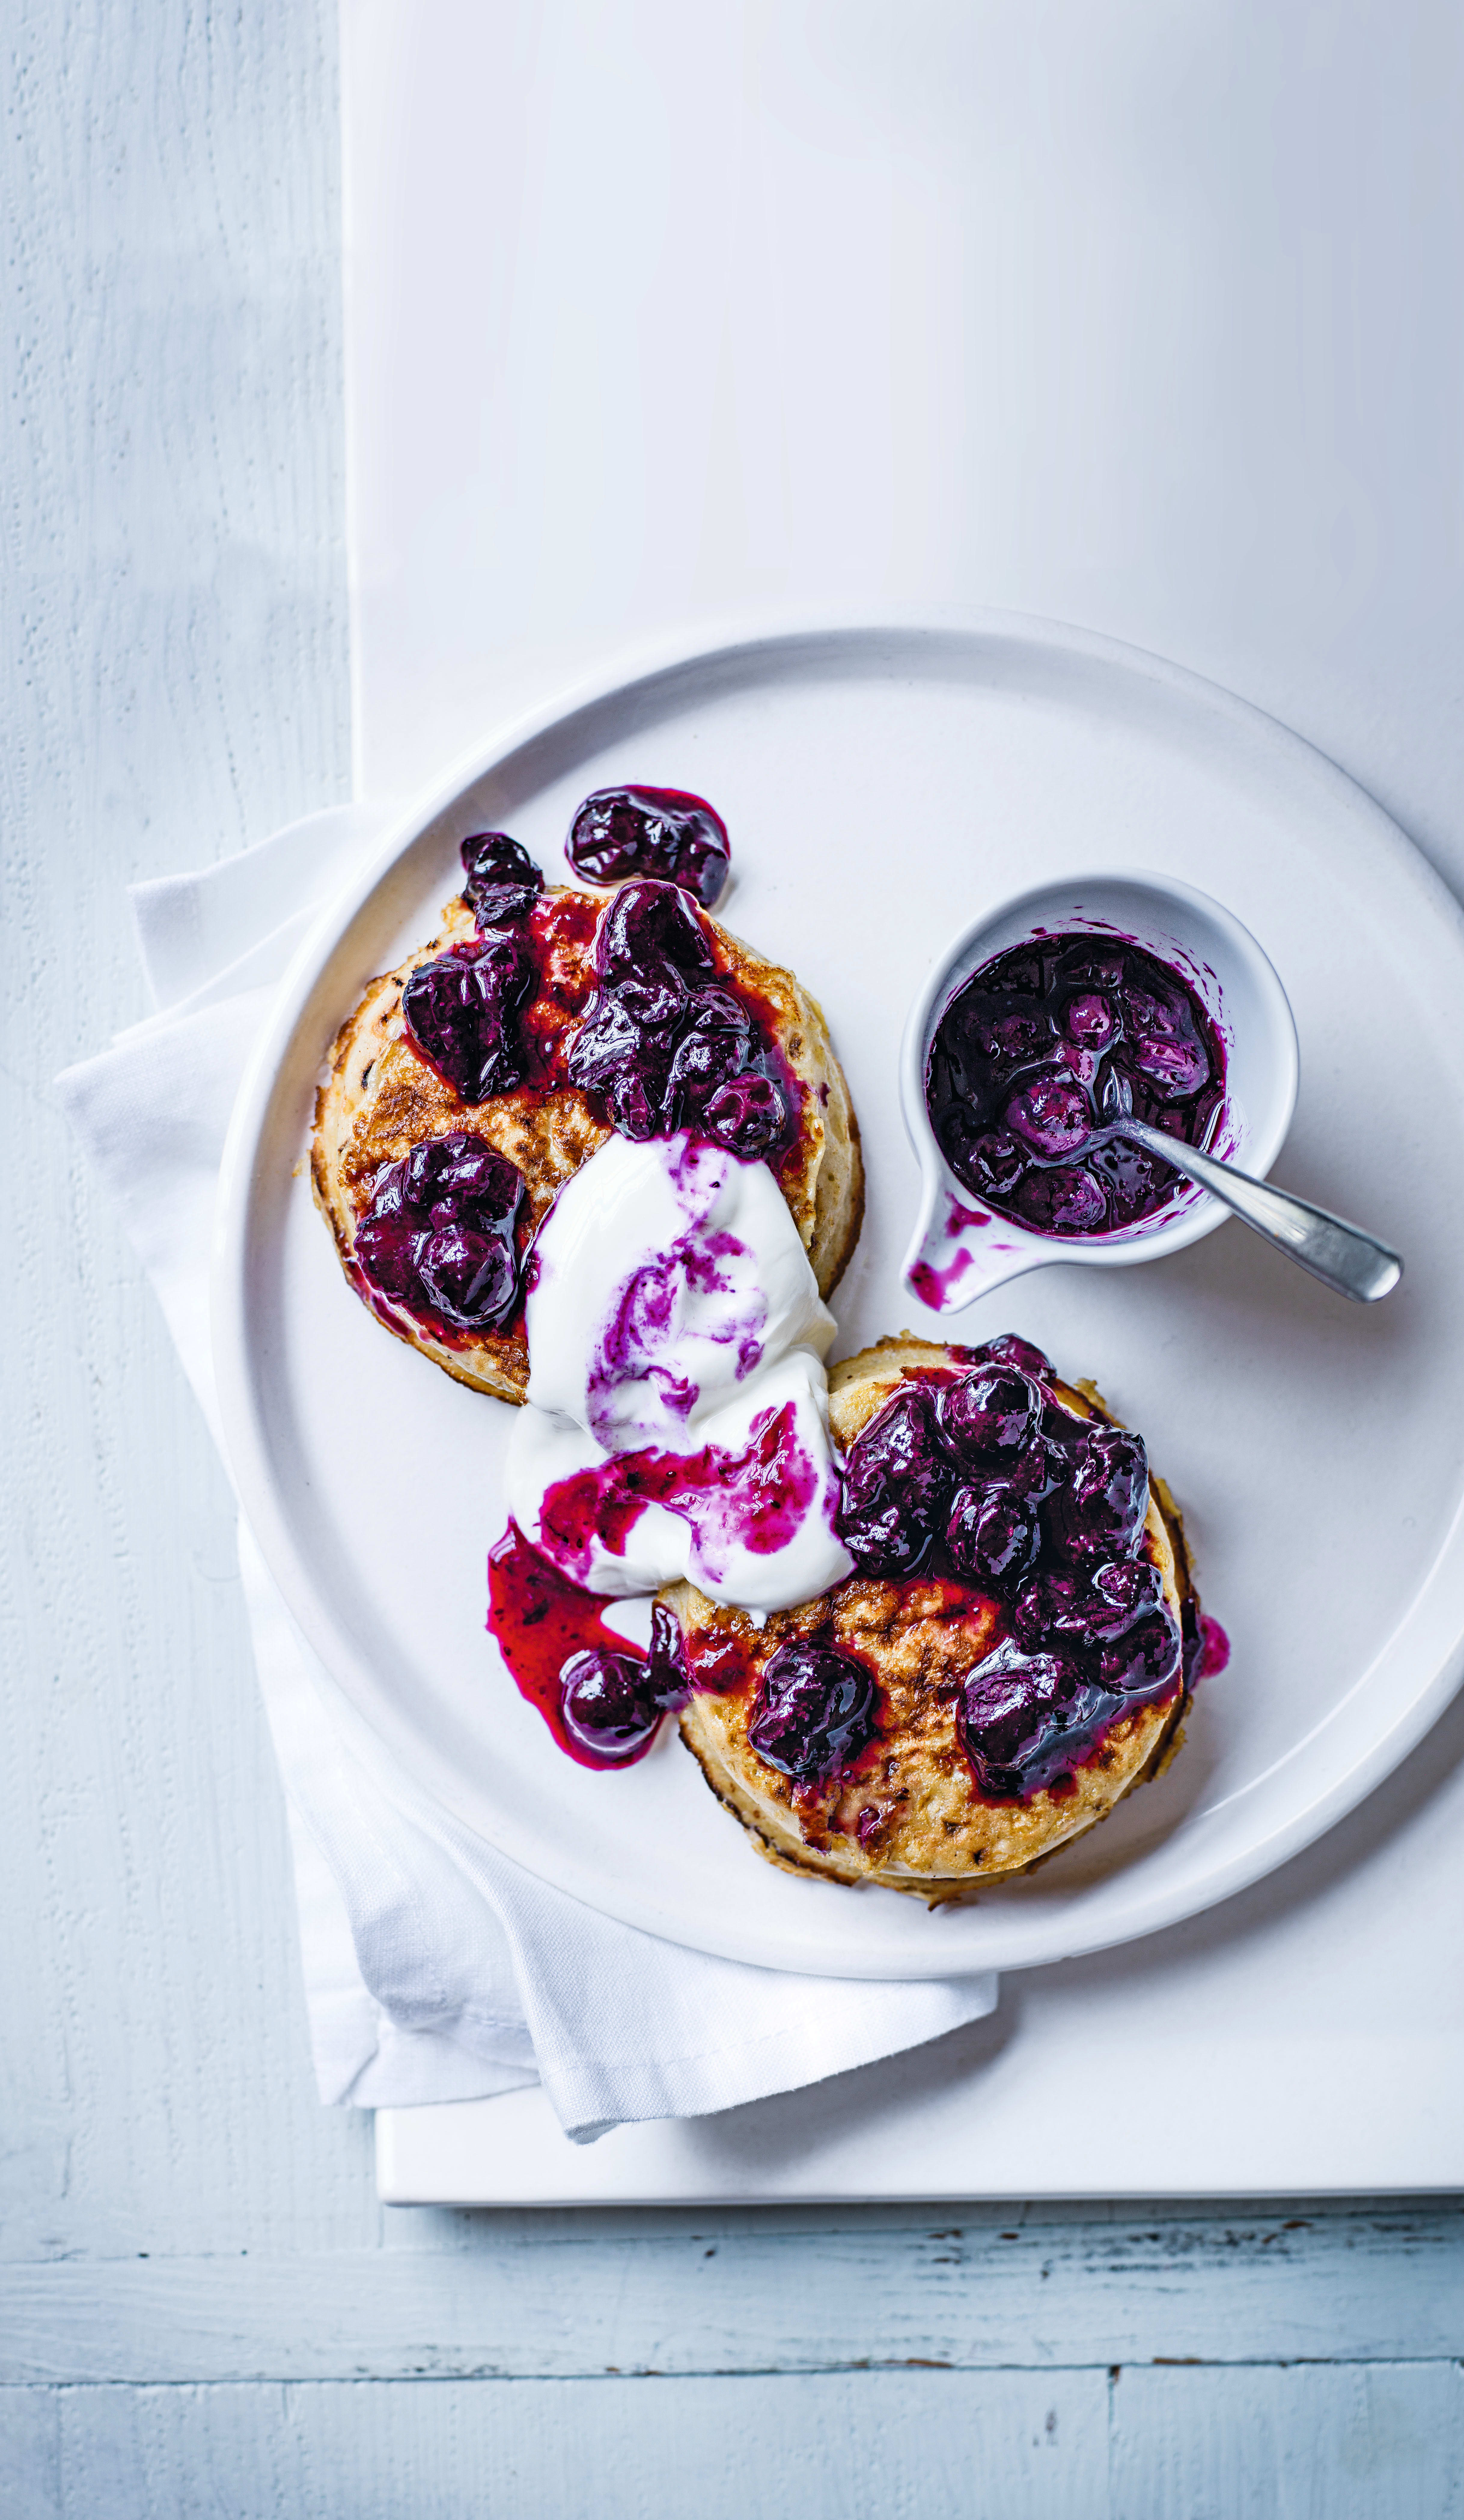 Photo of French toast crumpets with blueberry compôte by WW